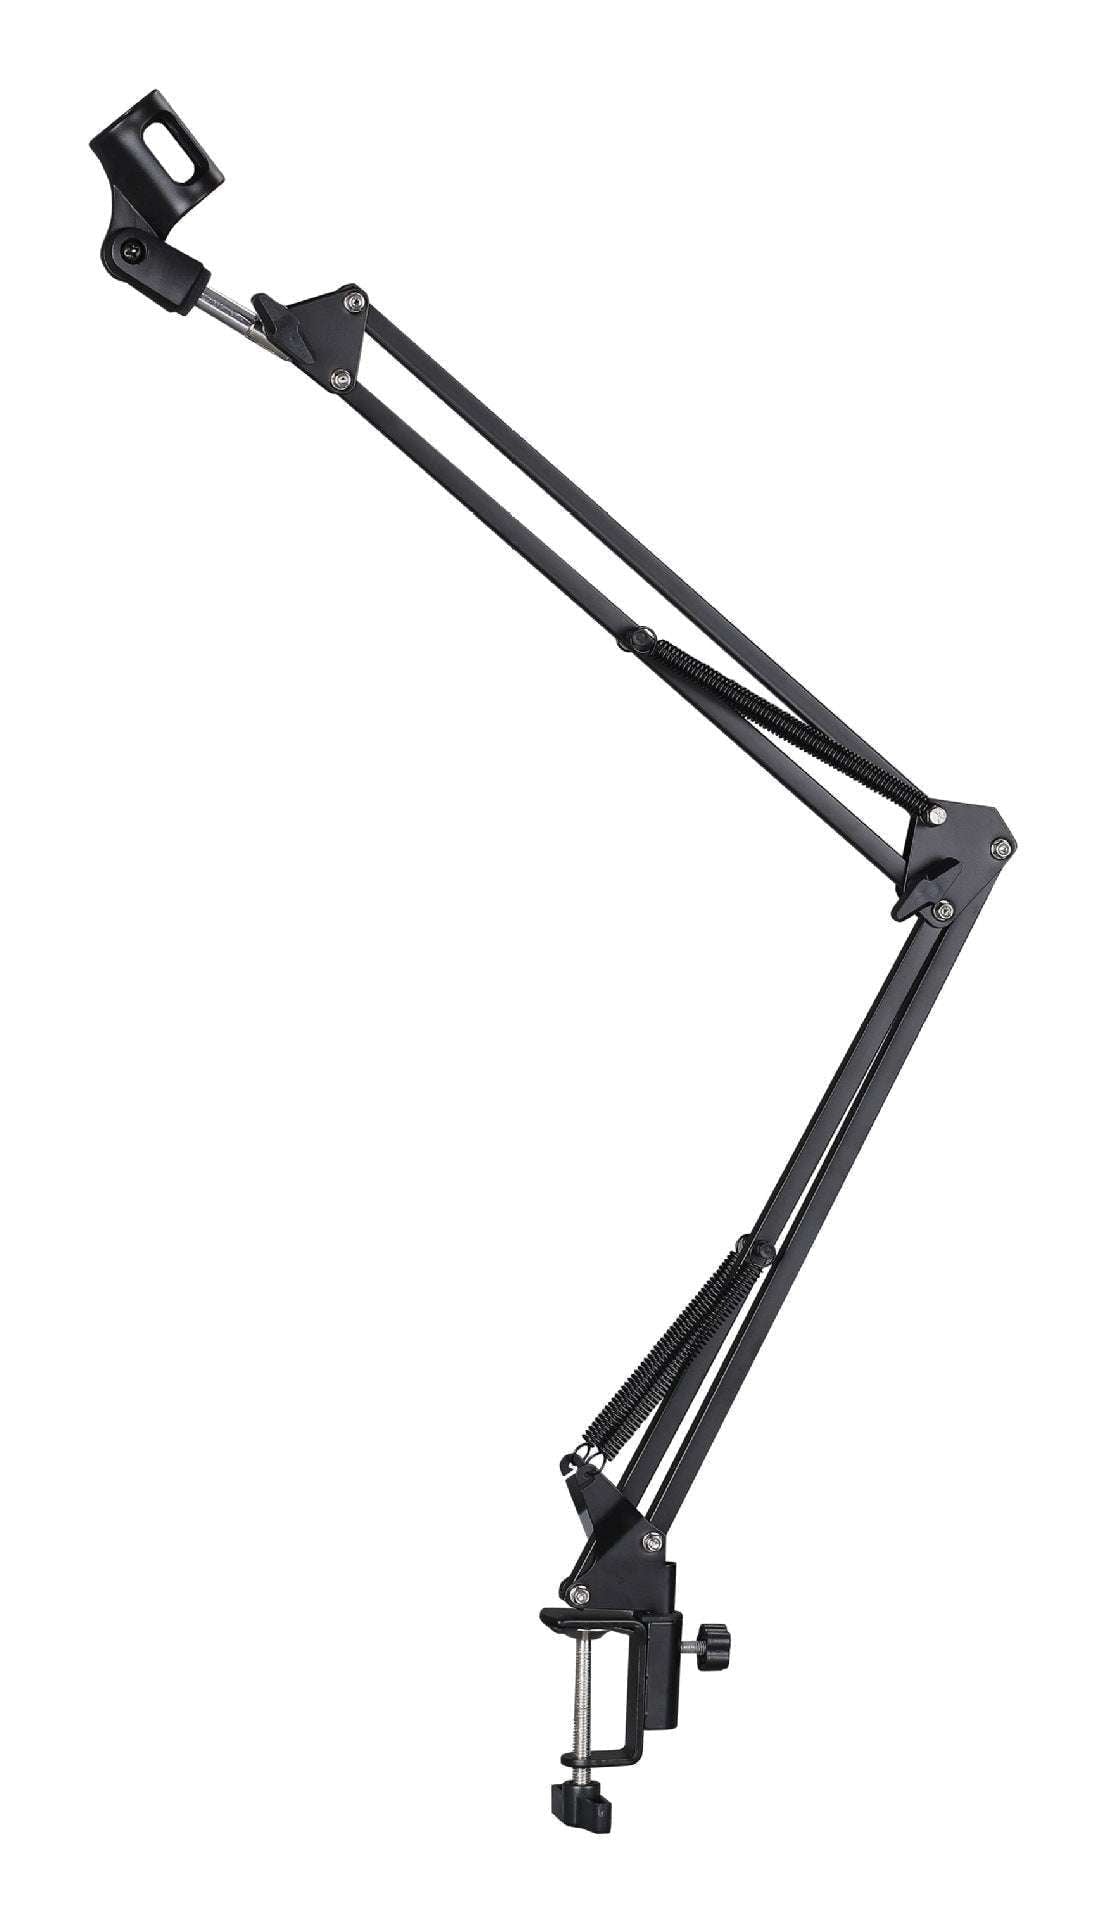 adjustable mic bracket, microphone wall mount, telescopic microphone holder - available at Sparq Mart